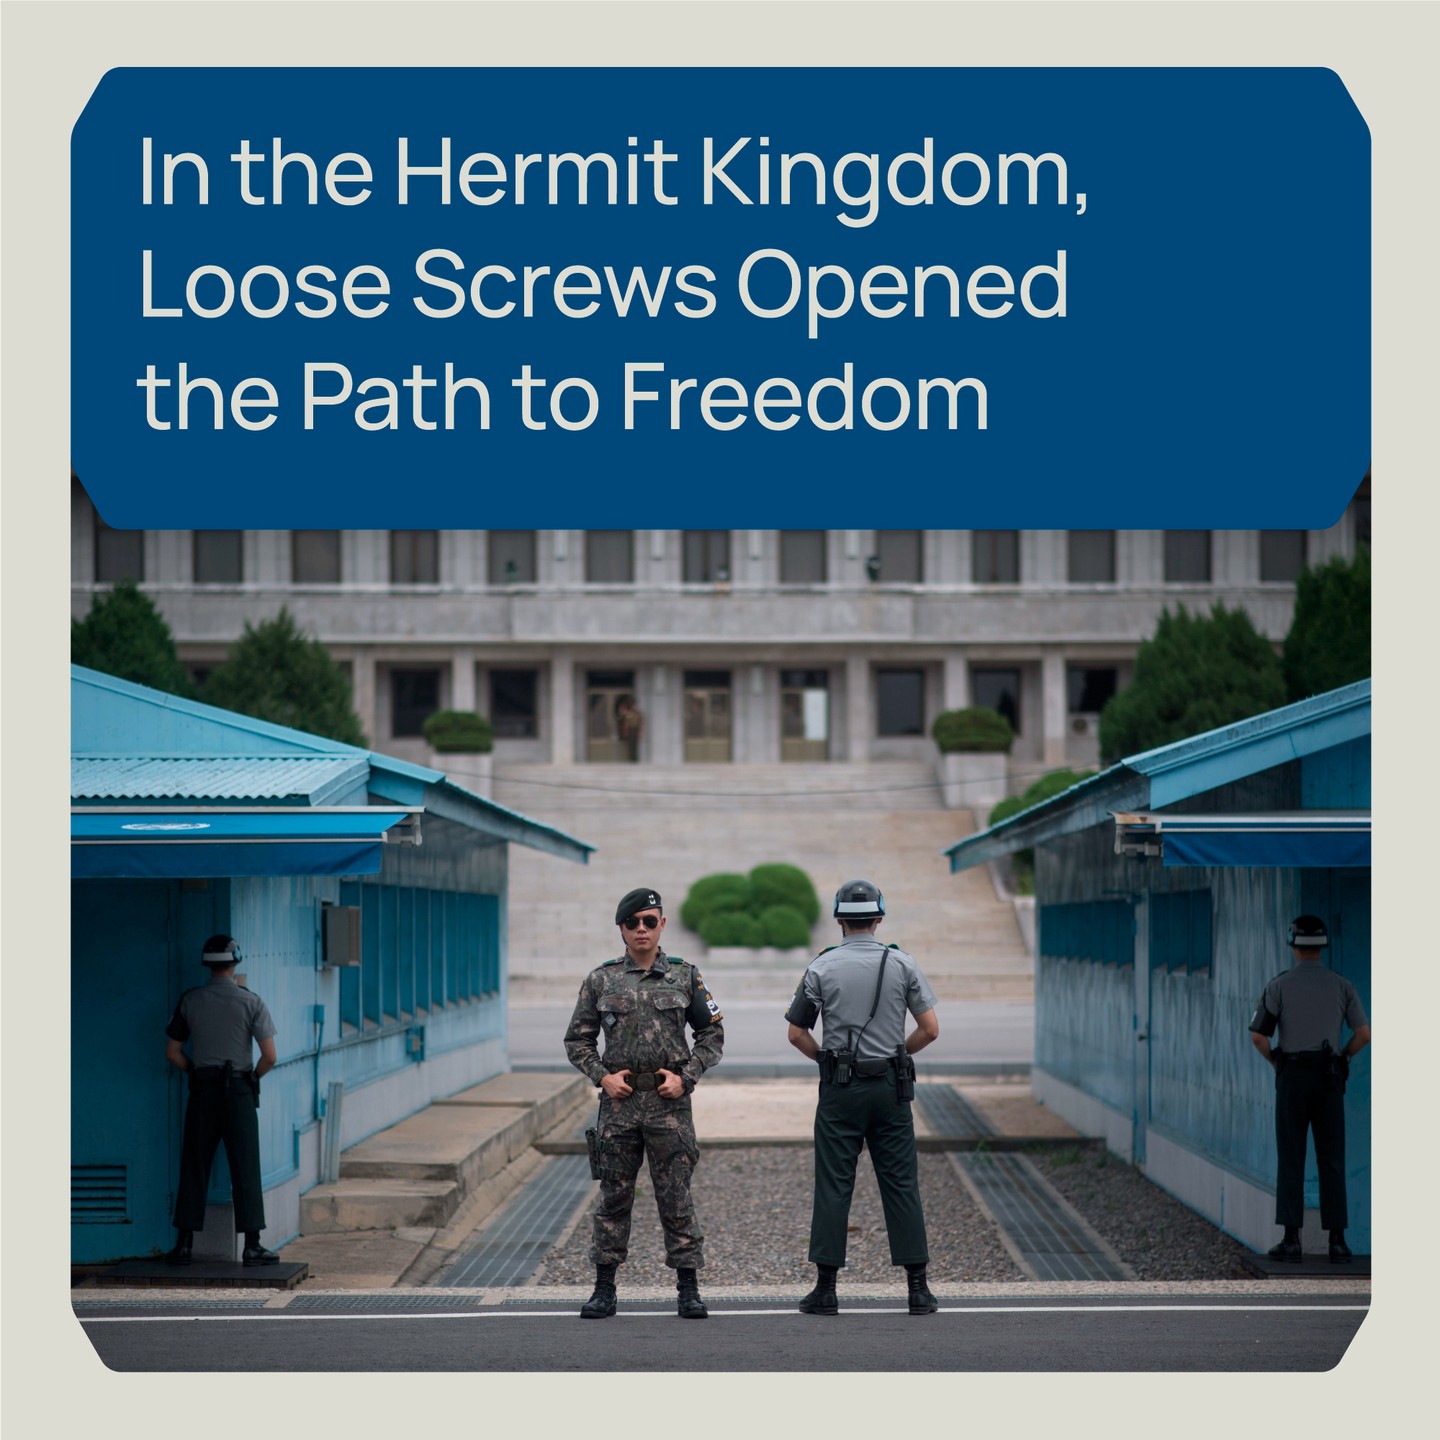 In the Hermit Kingdom Loose Screws Opened the Path to Freedom